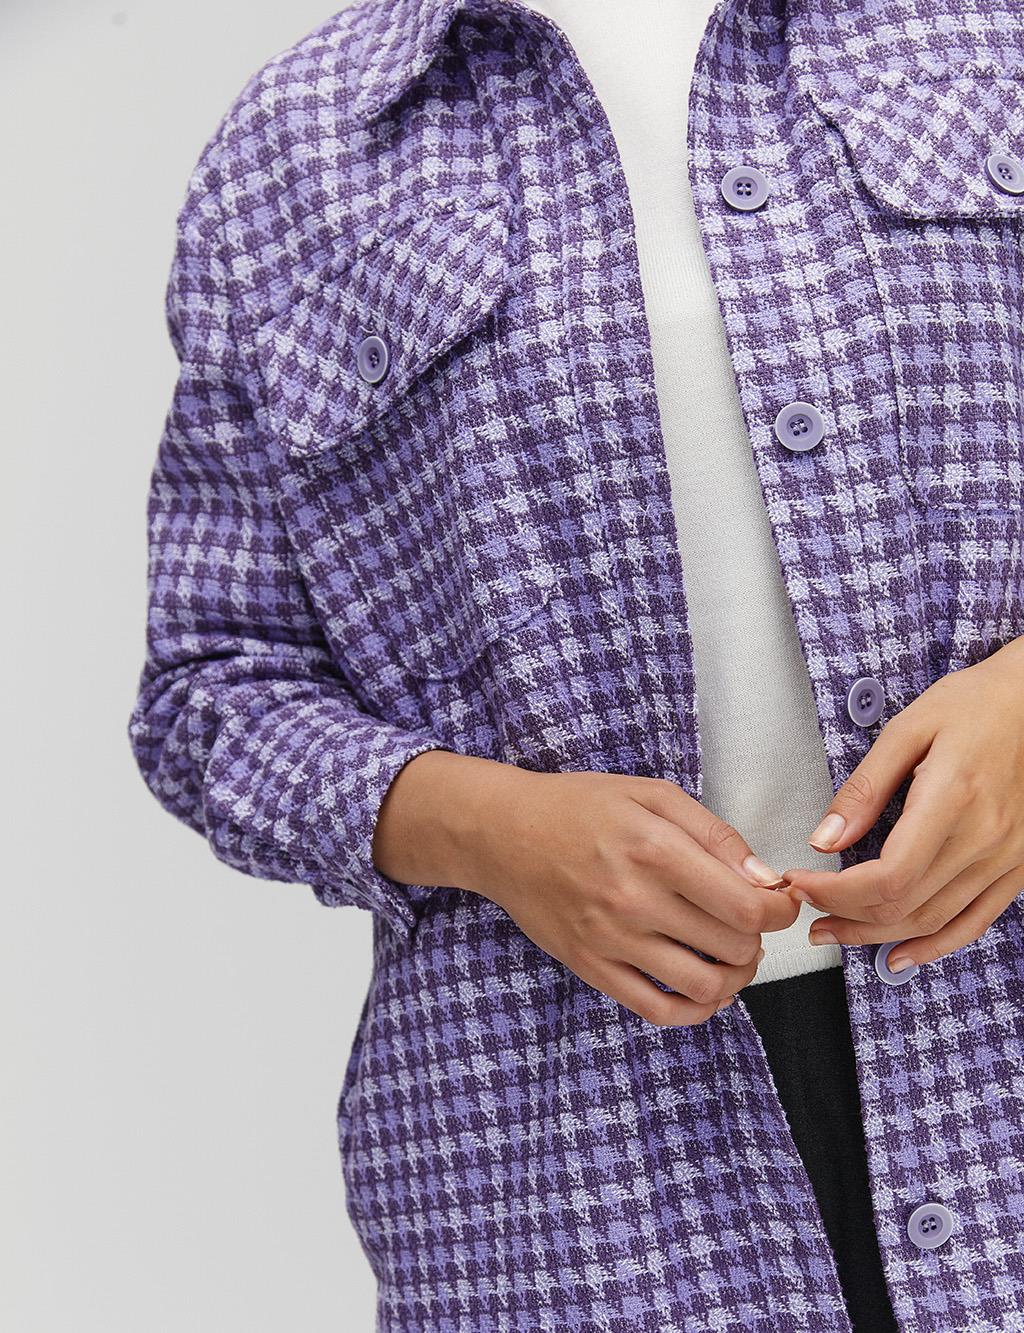 KYR Double Pocketed Houndstooth Patterned Shirt Purple